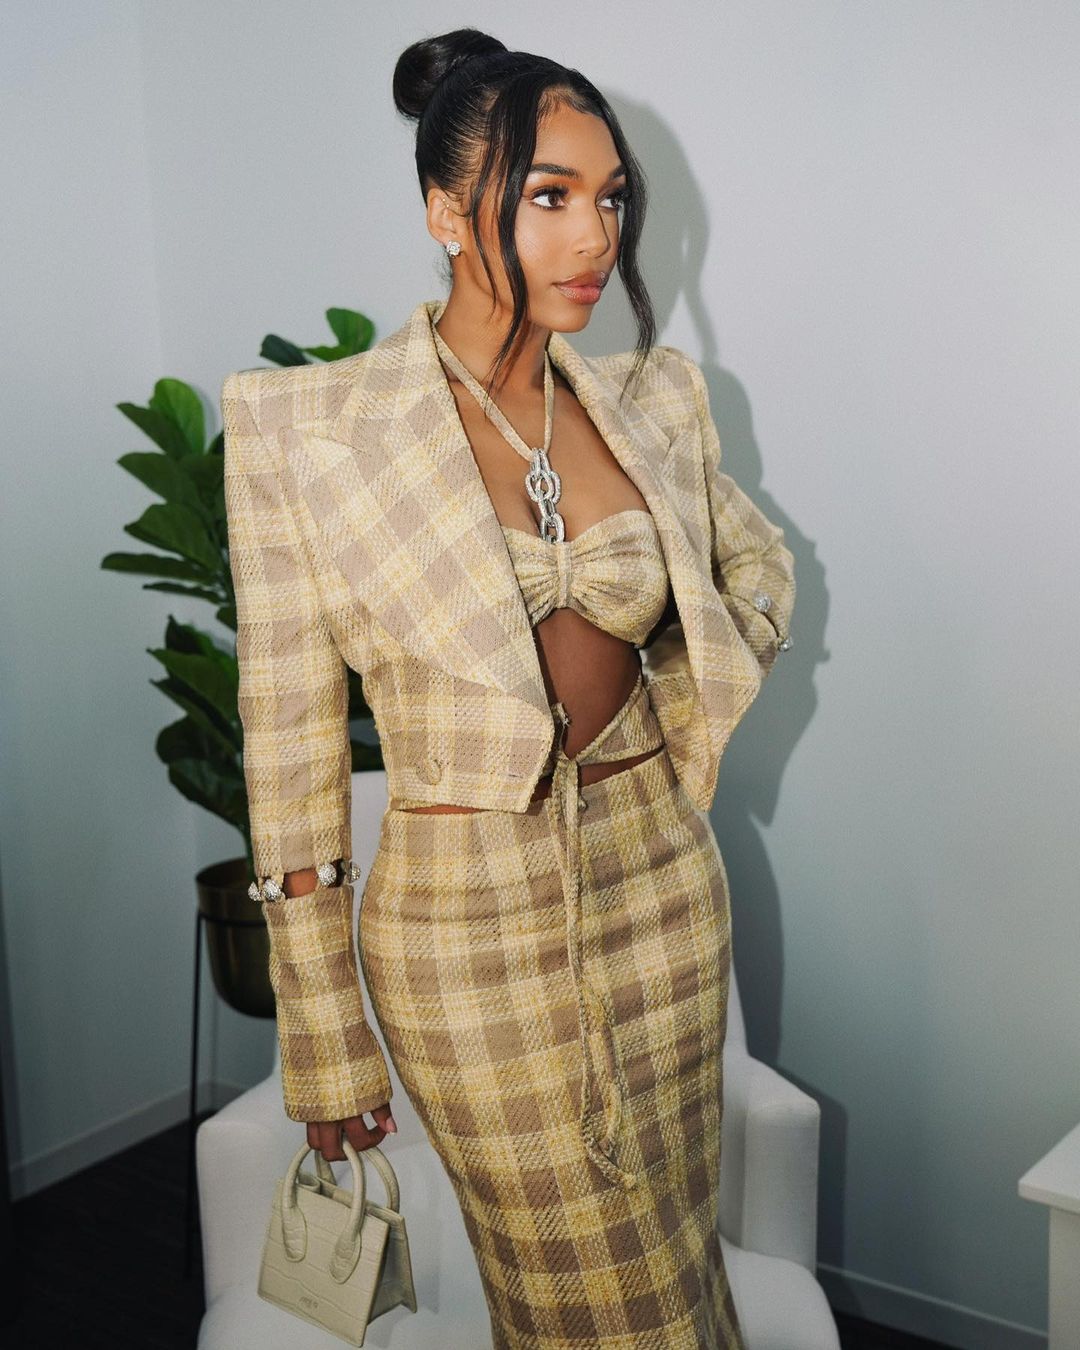 Who Is Lori Harvey New Boyfriend: Is She Dating Anyone? Their Relationship Timeline Explored